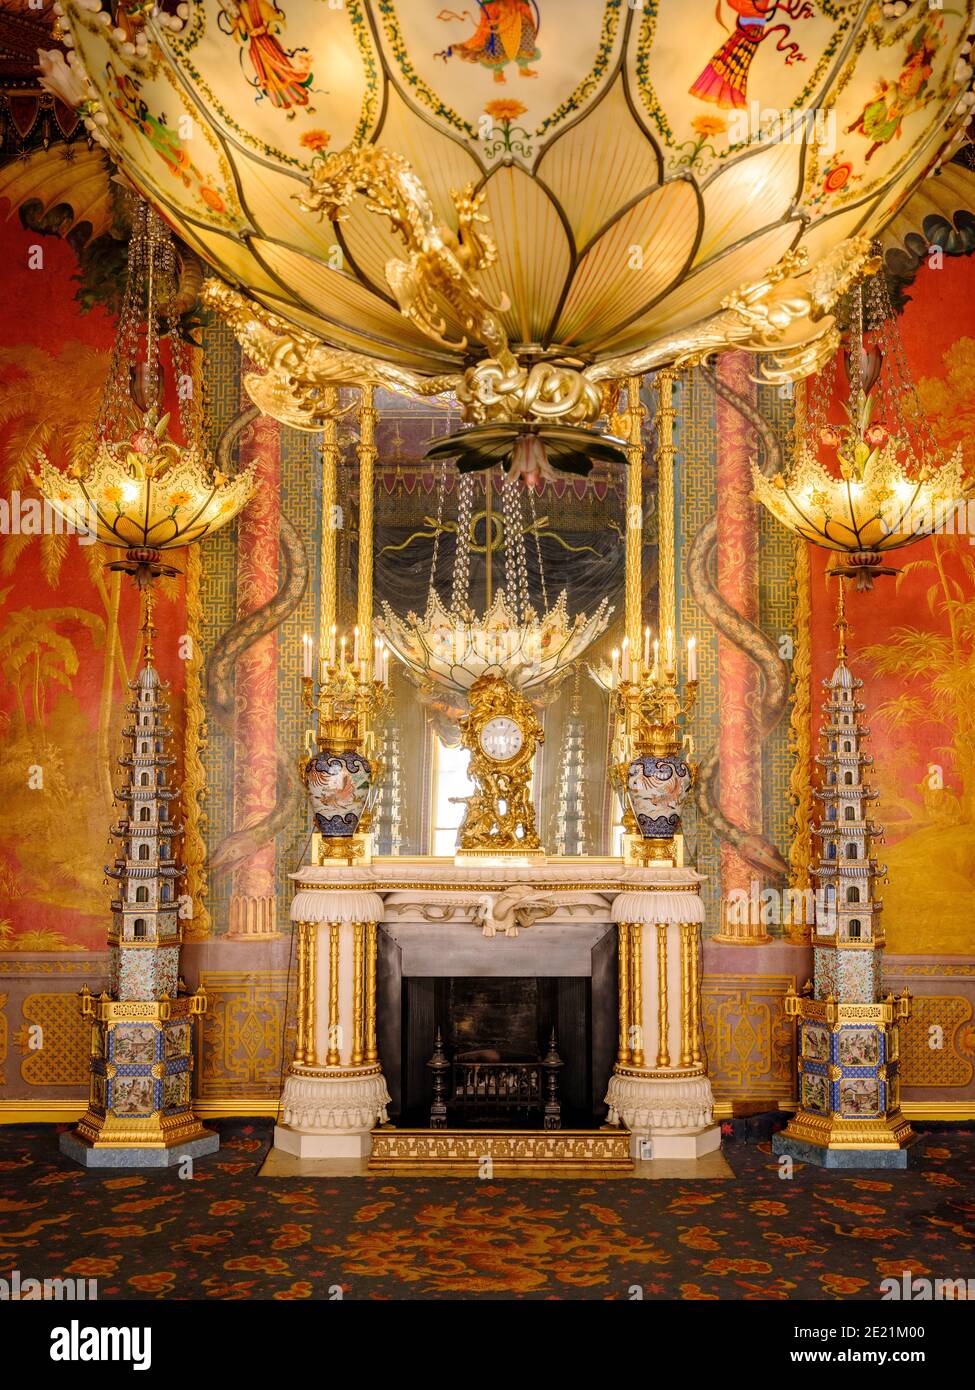 The Royal Pavilion Brighton: The music room during the exhibition of the Royal Colection a Prince's Treasure on loan 2020 and 2021. Featuring pagodas seen here either side of the fireplace. Stock Photo